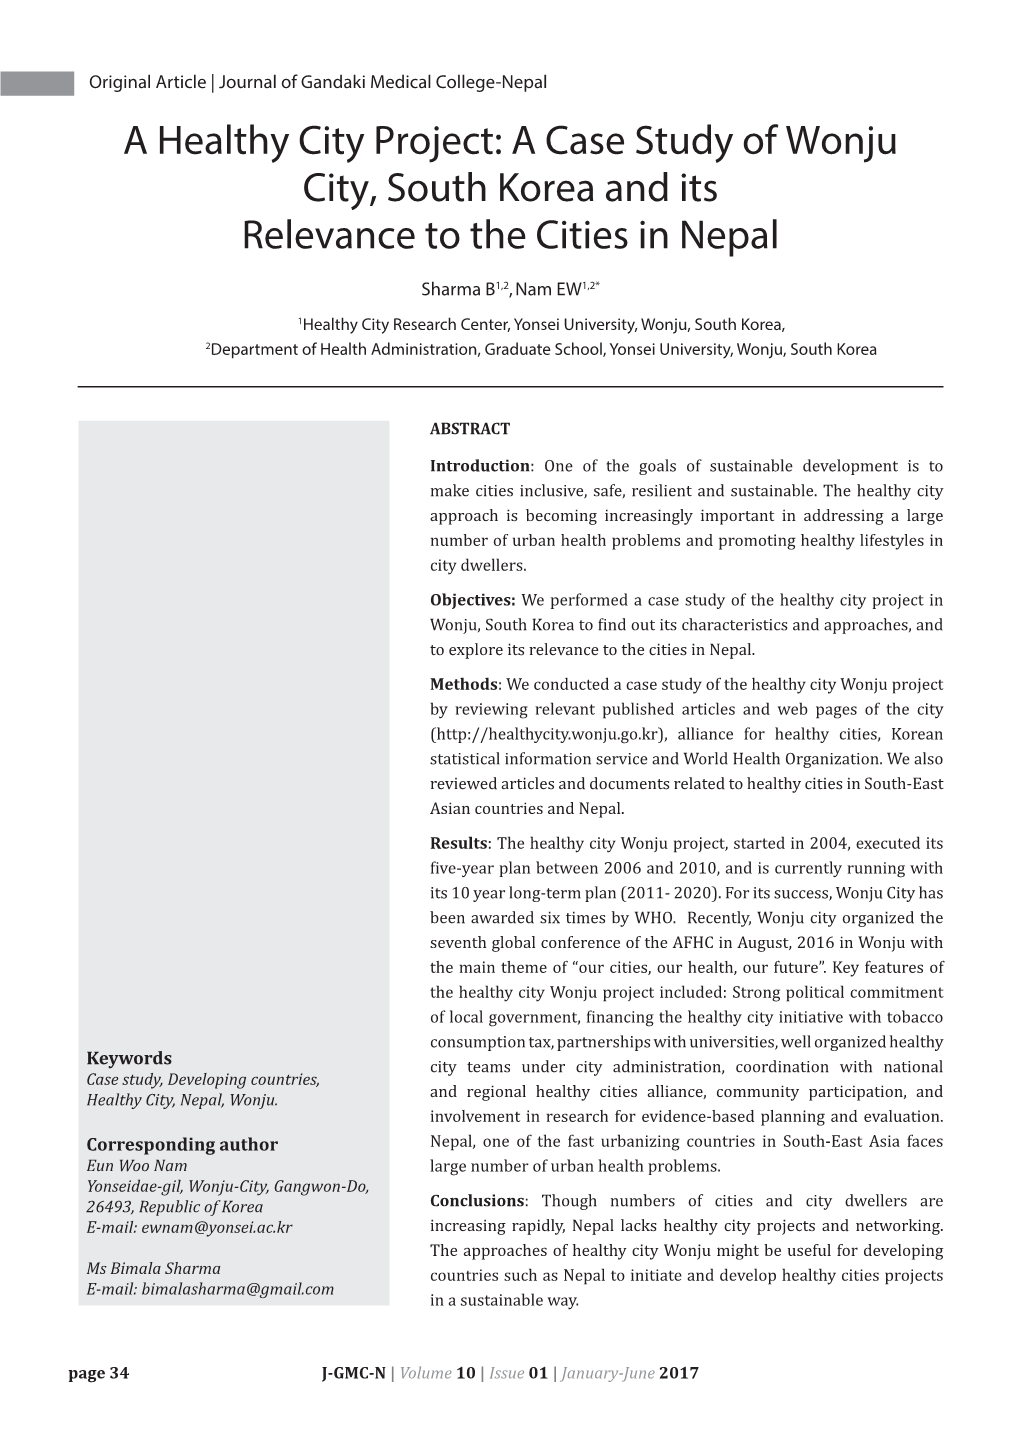 A Healthy City Project: a Case Study of Wonju City, South Korea and Its Relevance to the Cities in Nepal